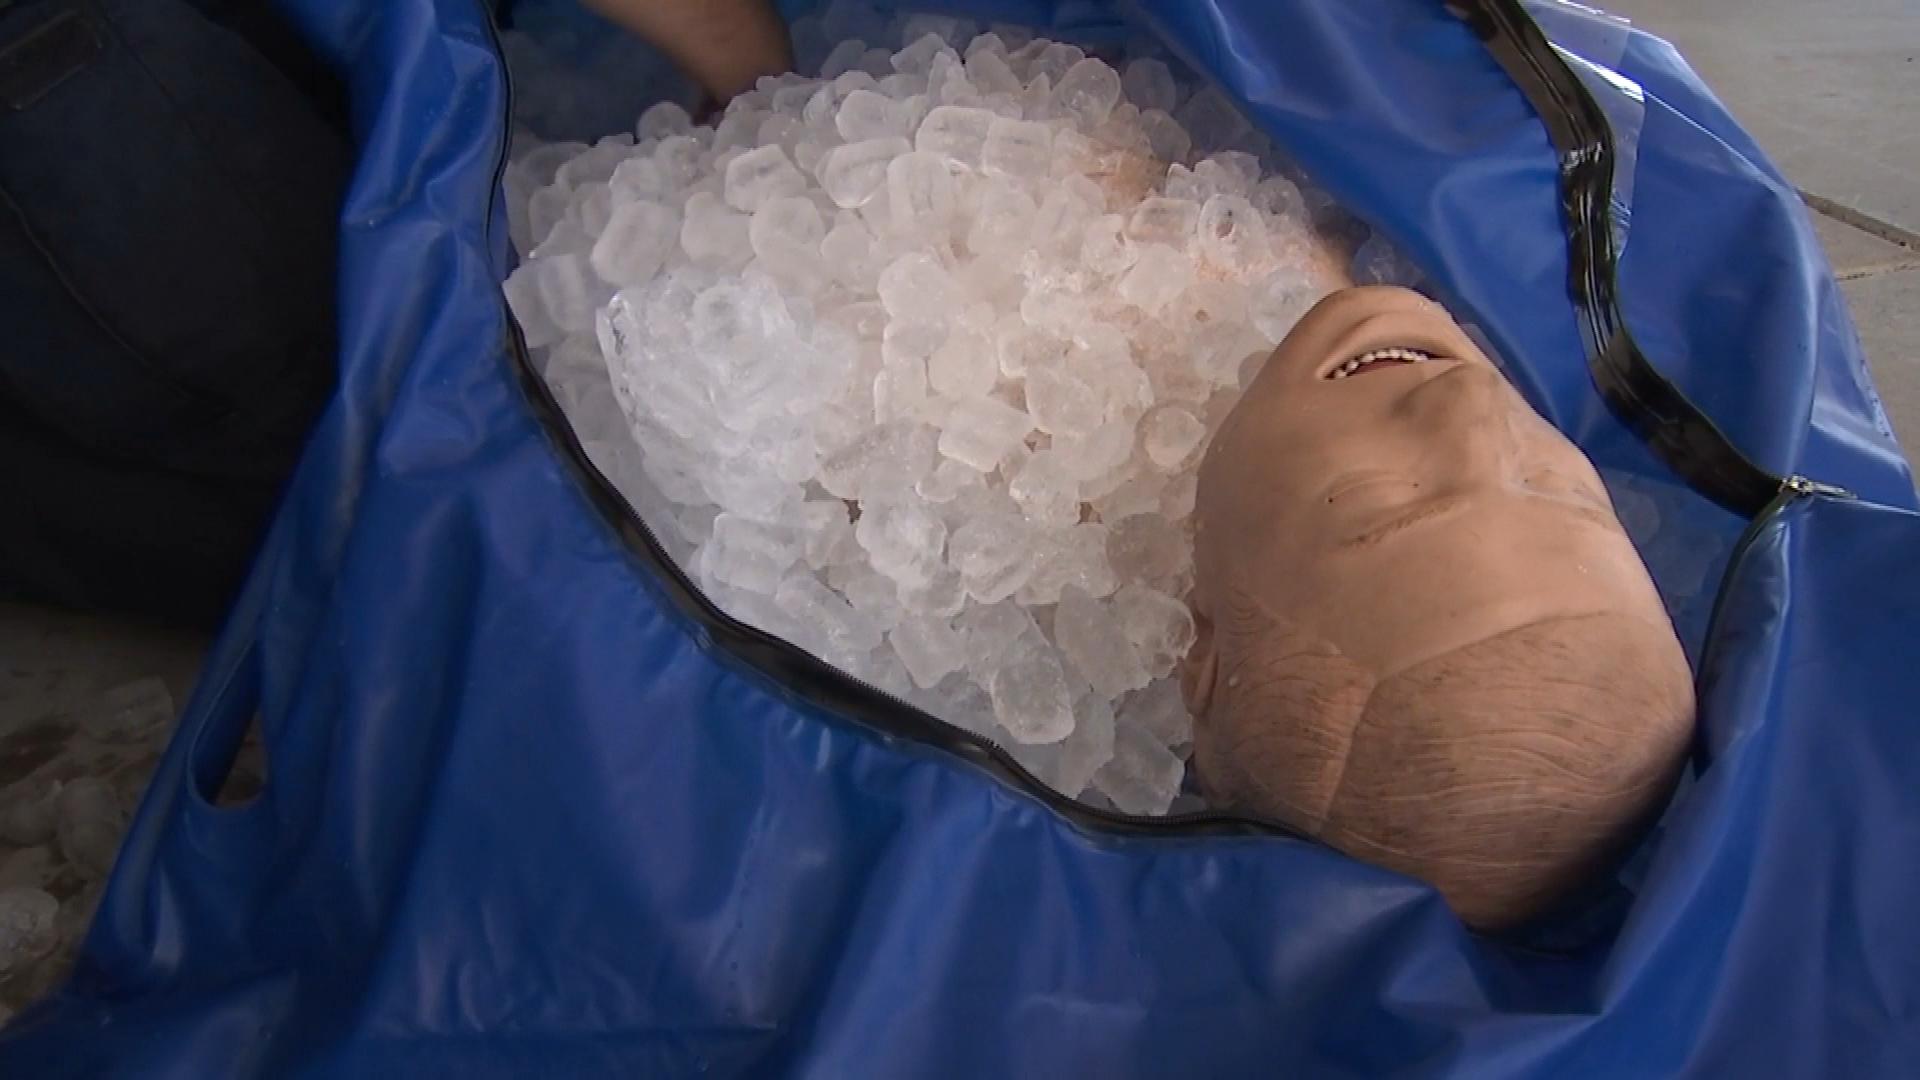 Practice dummy in cooling bag with ice